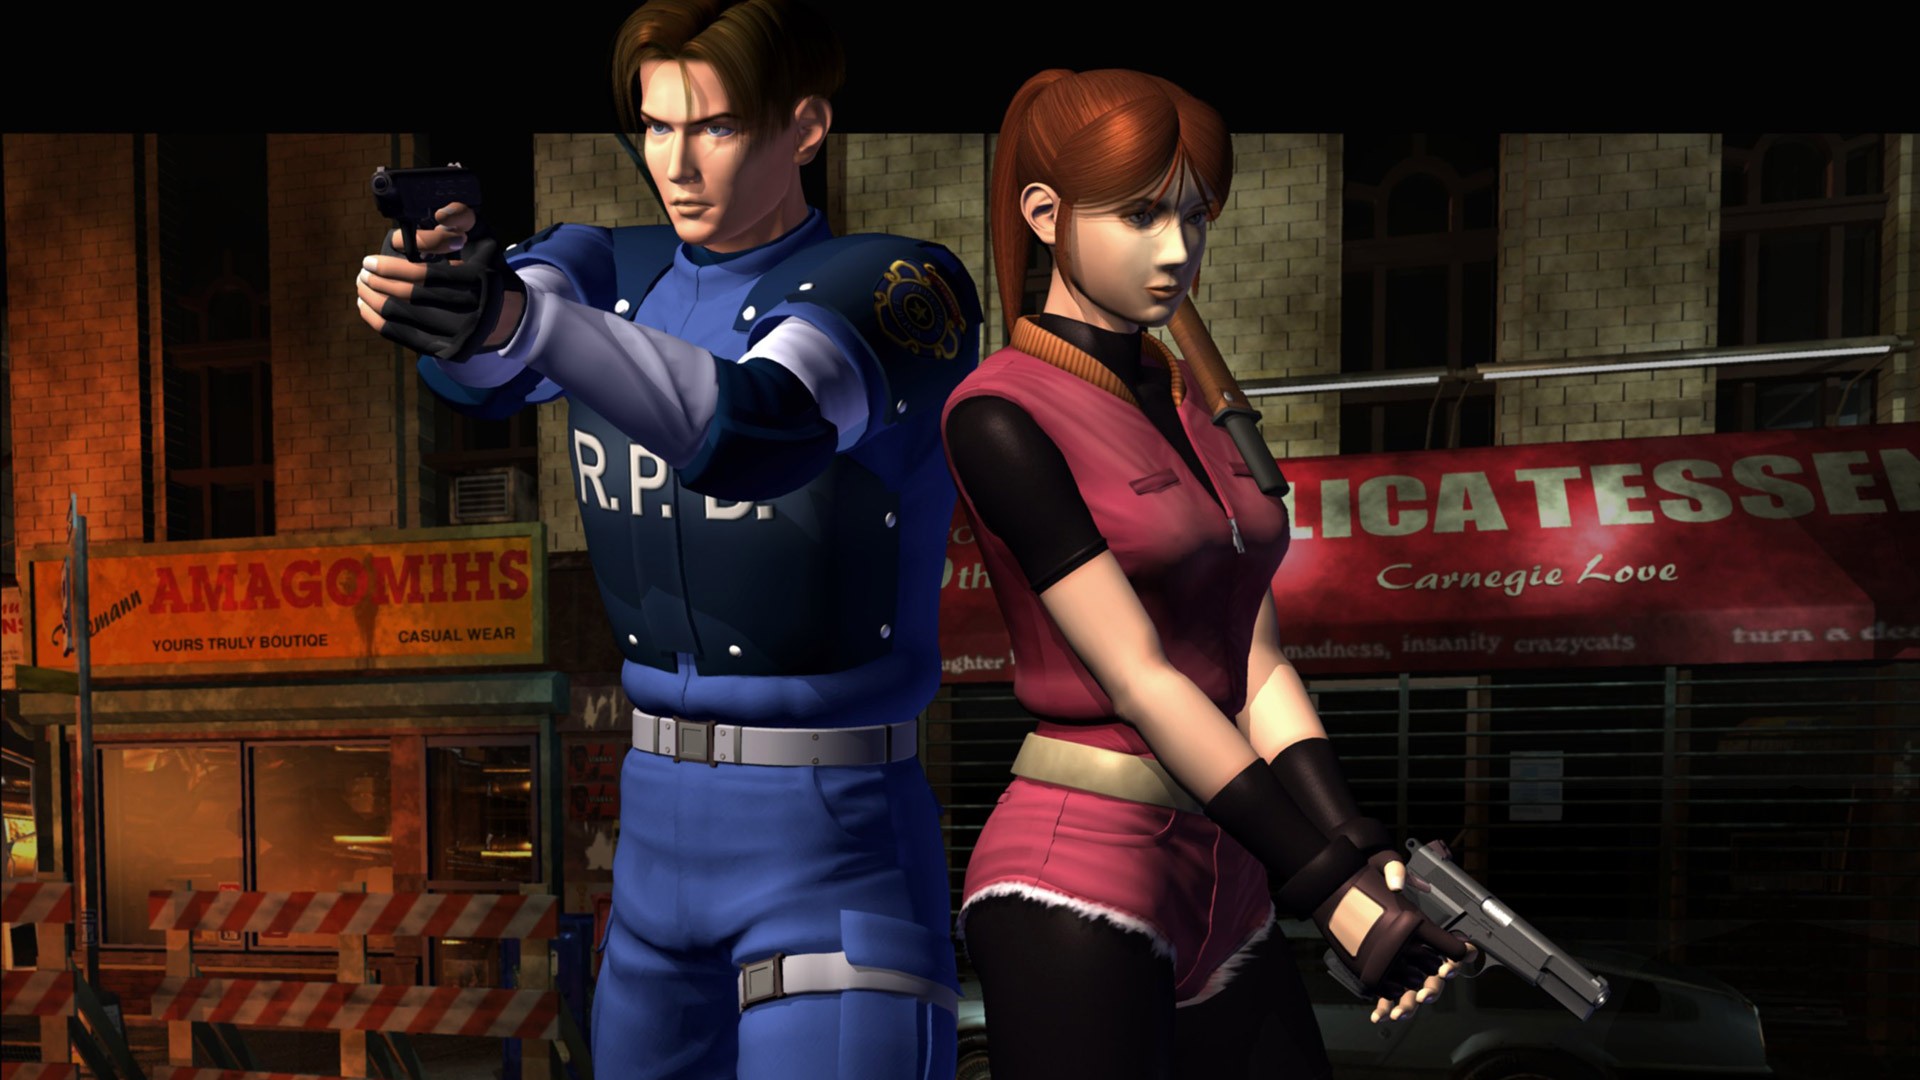 Resident Evil 2 Resident Evil Leon S Kennedy Claire Redfield Video Games Leon Kennedy 1920x1080